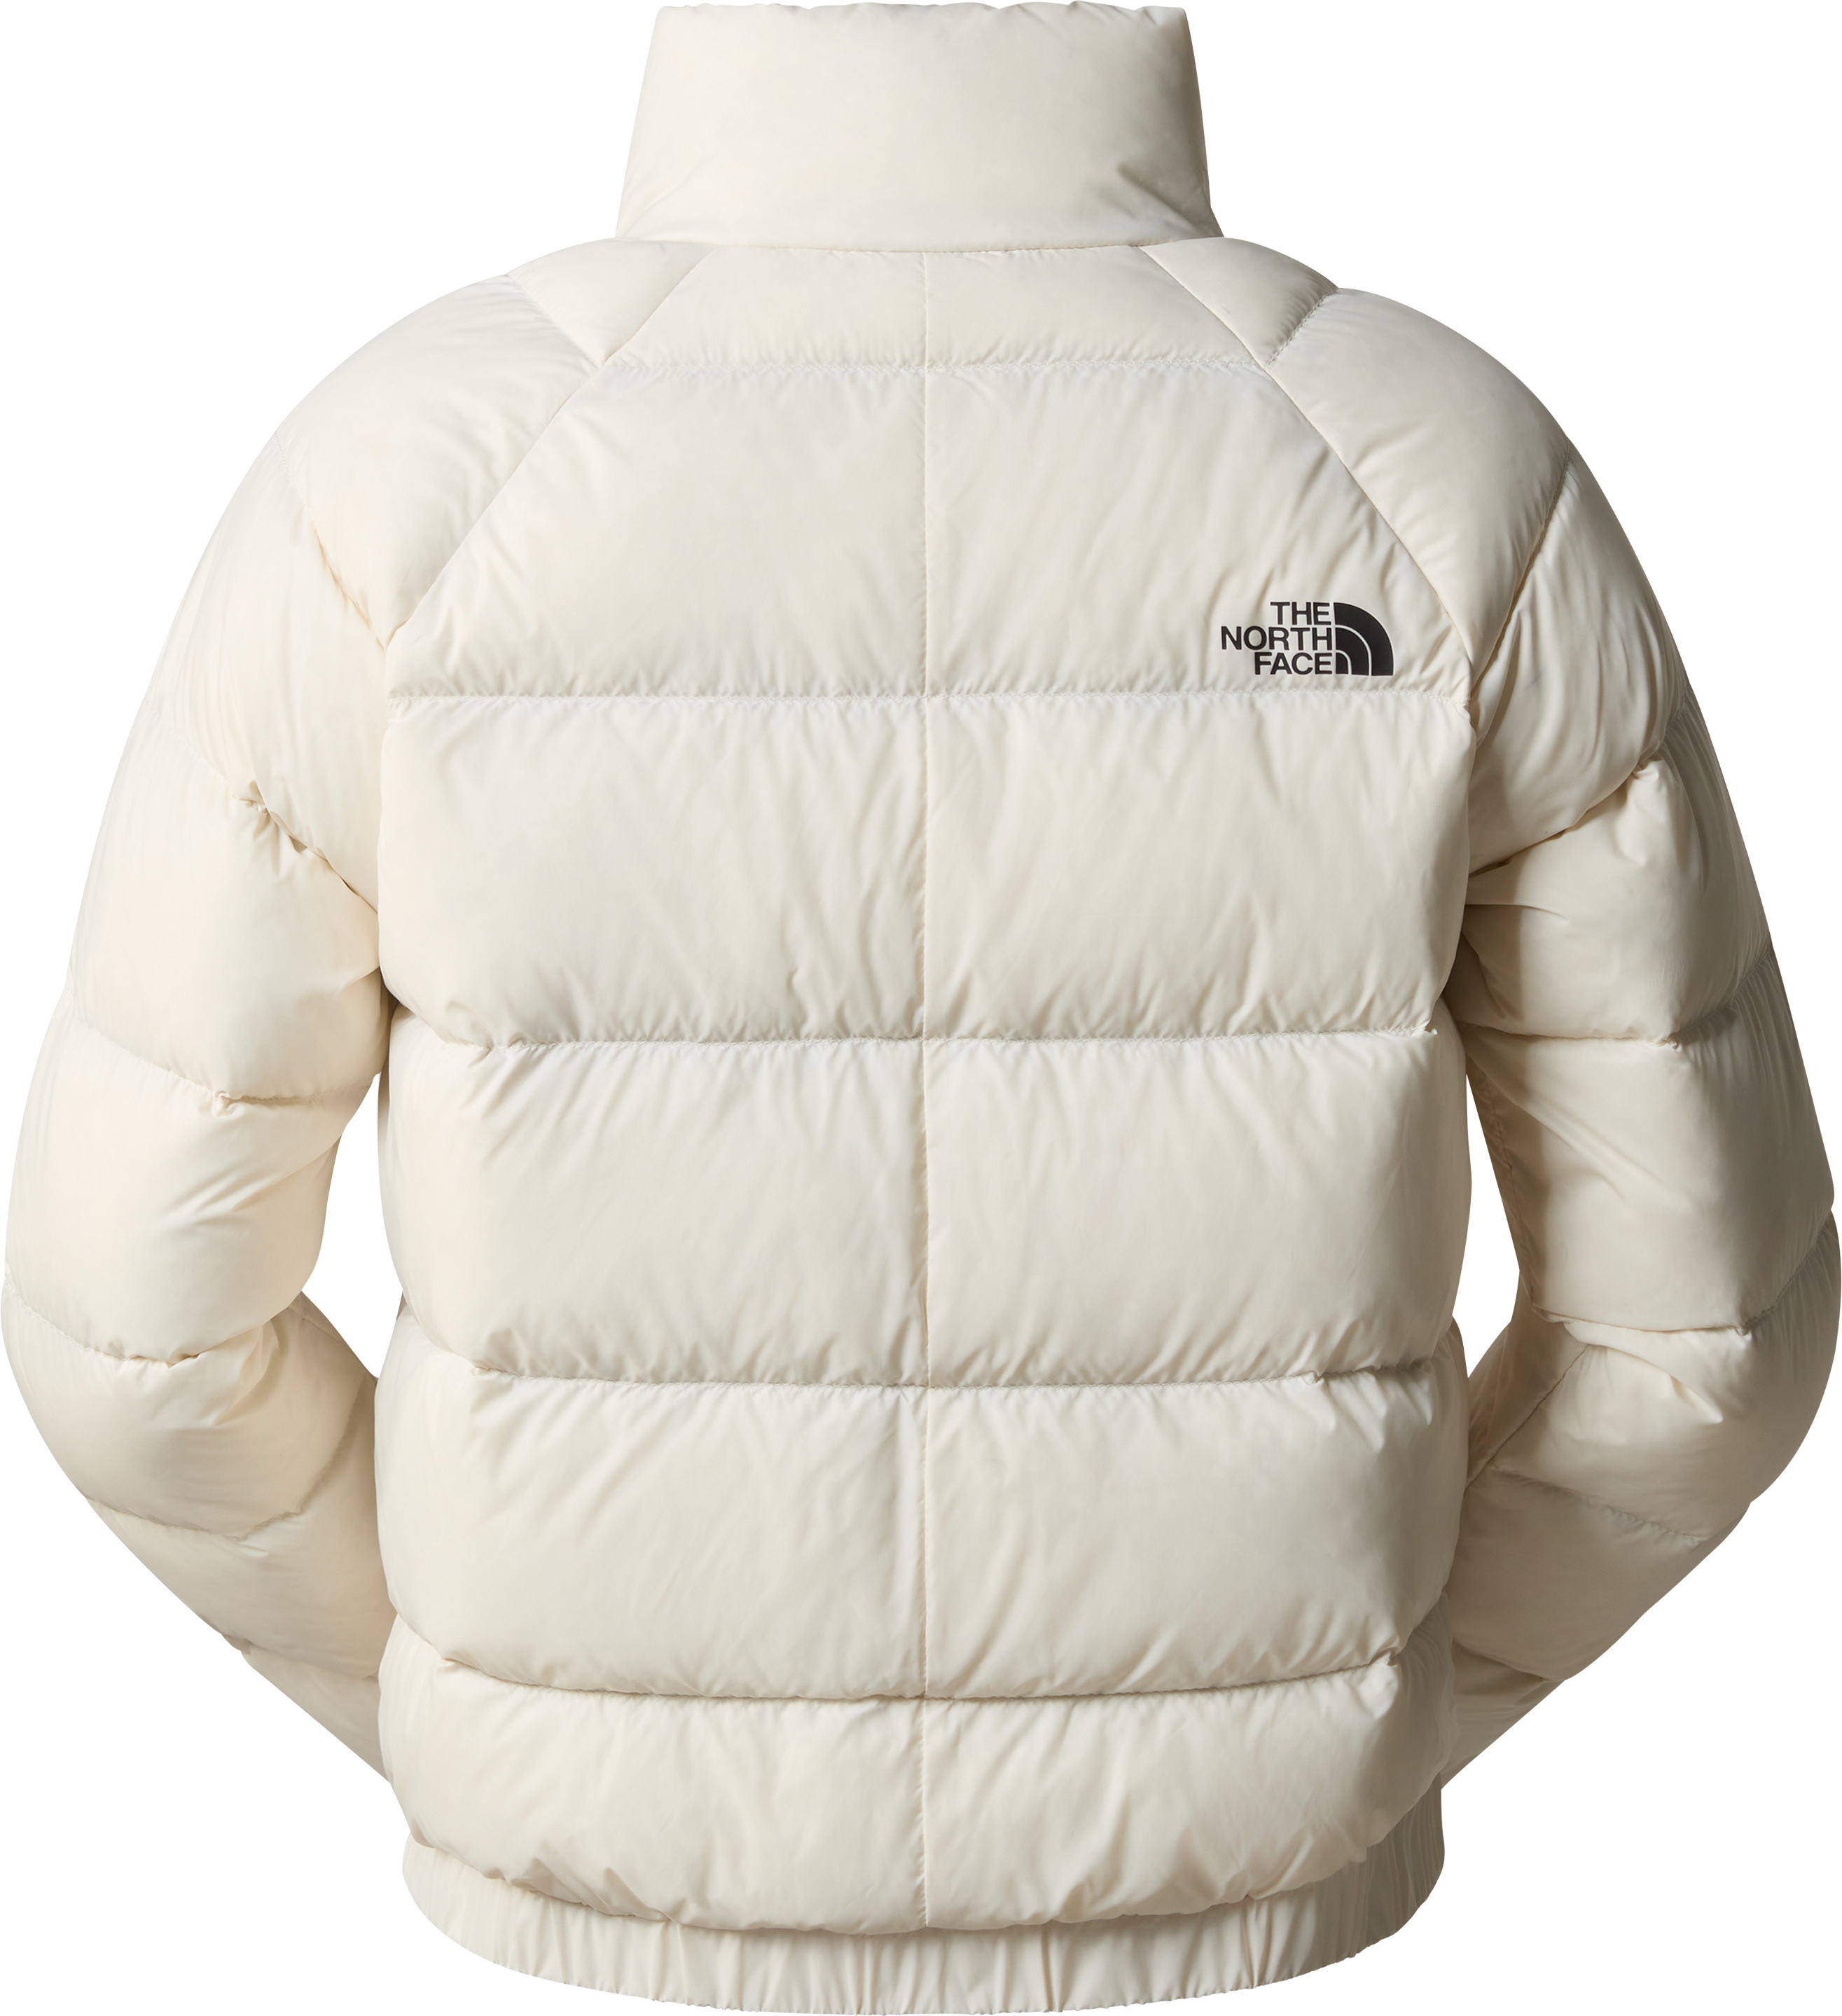 The North Face Girls' Dealio City Winter Jacket, Kids', Puffer